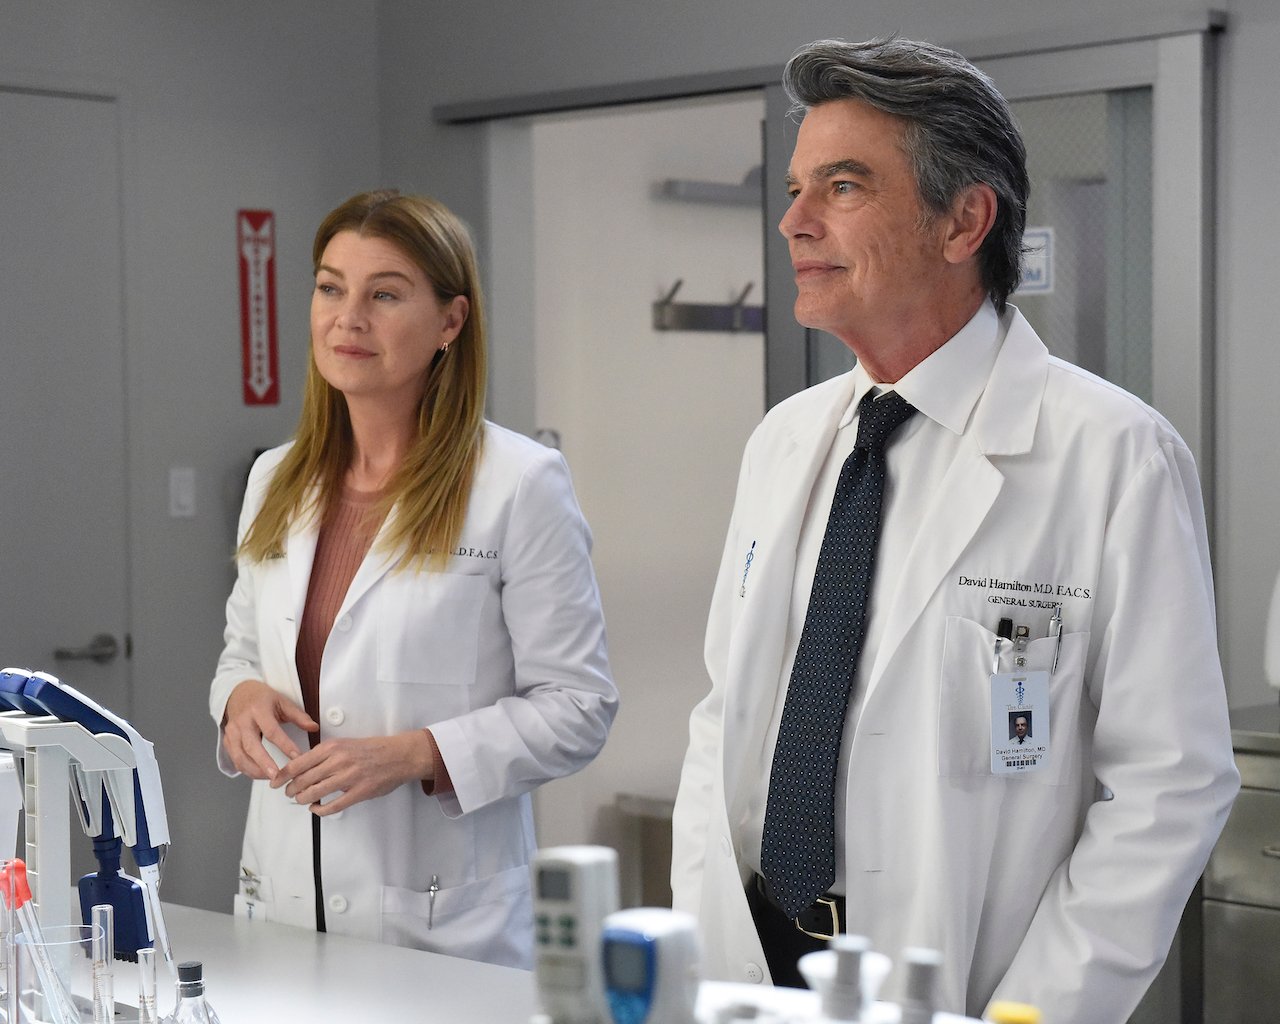 Ellen Pompeo in Meredith Grey and Peter Gallagher as David Hamilton stand next to each other in a lab in lab coats on 'Grey's Anatomy'.